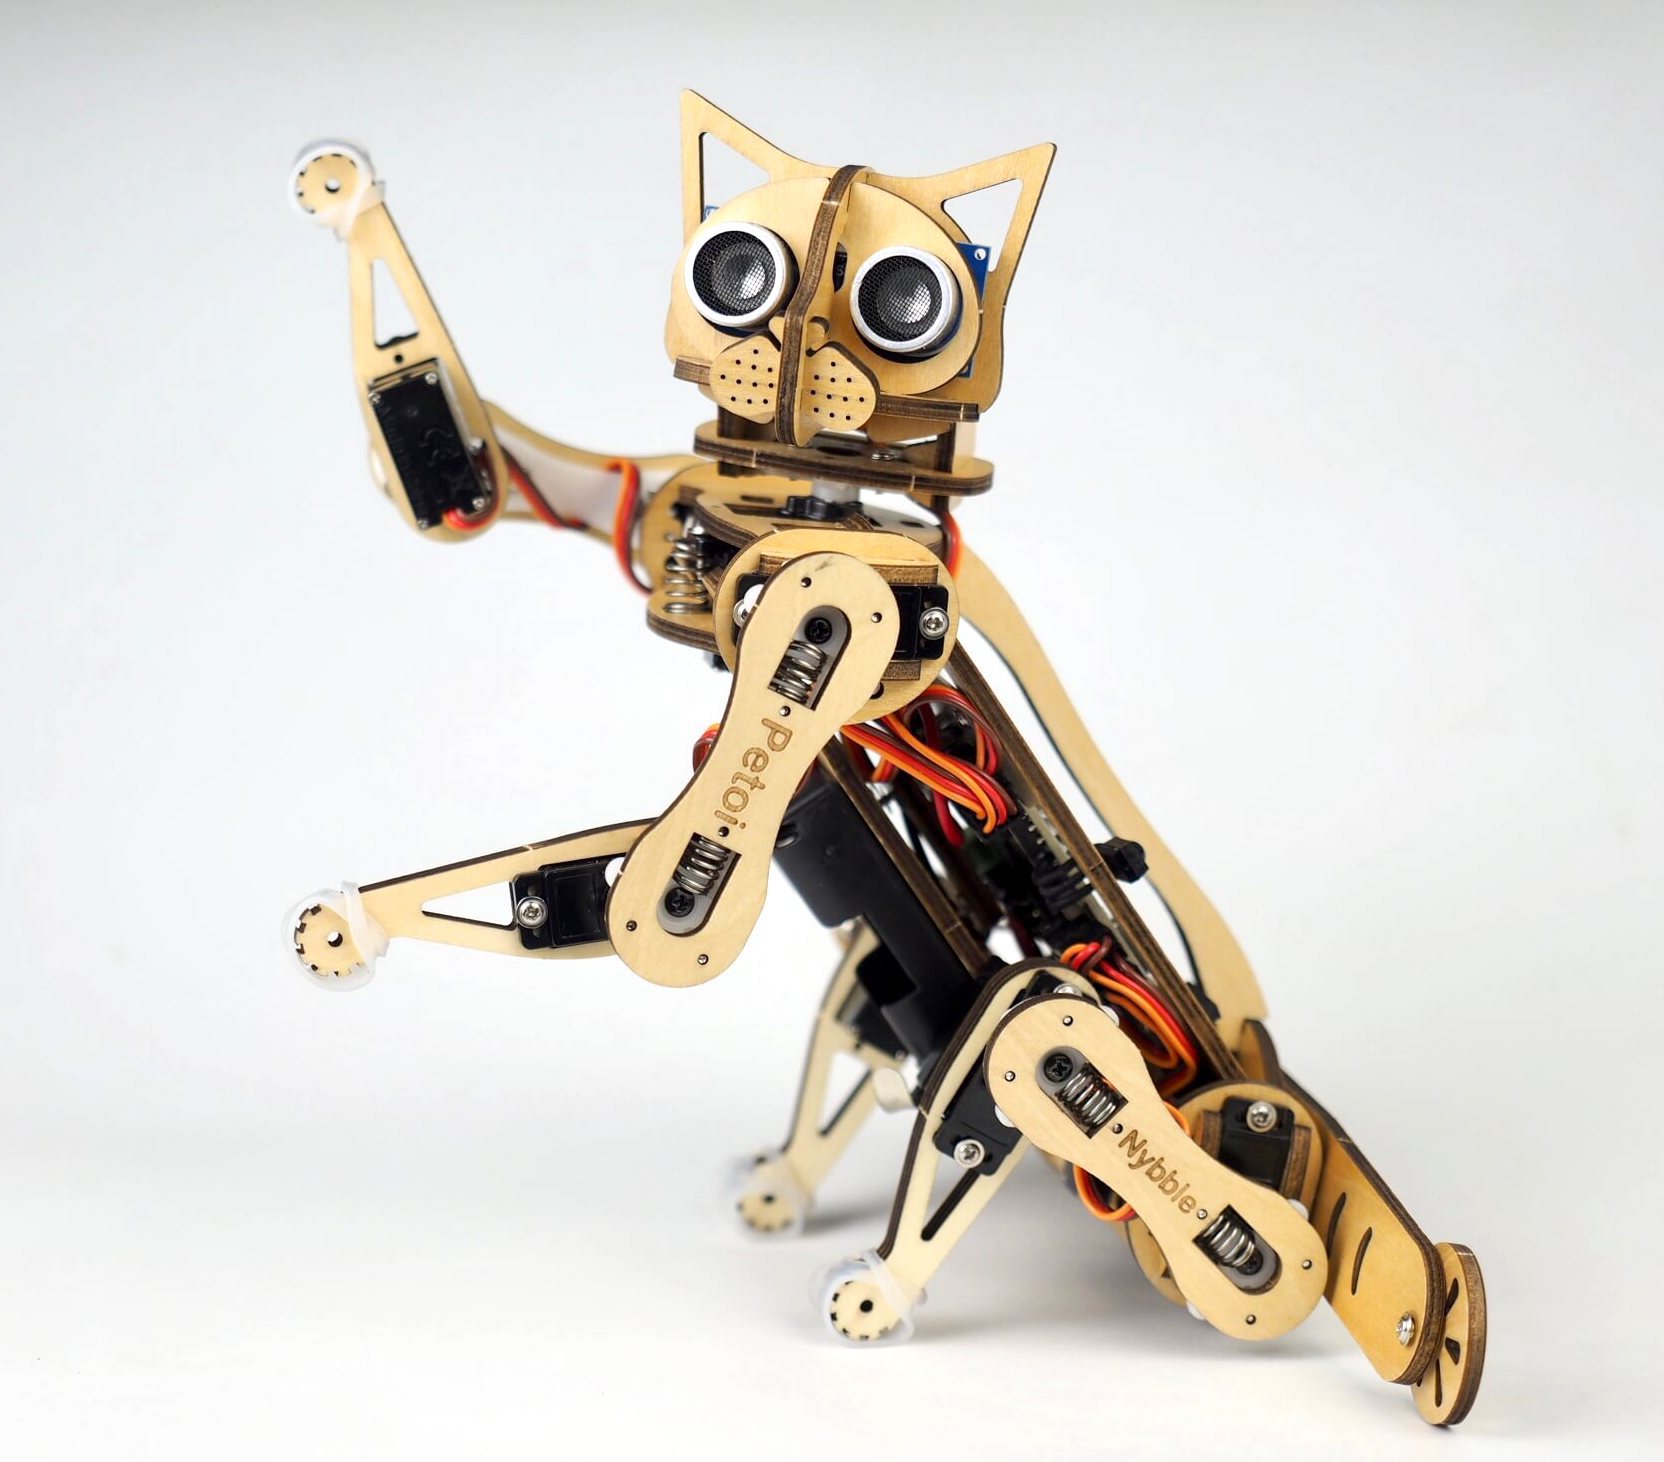 Nybble – Programmable Open Source Robot for STEM and Fun – Robotics